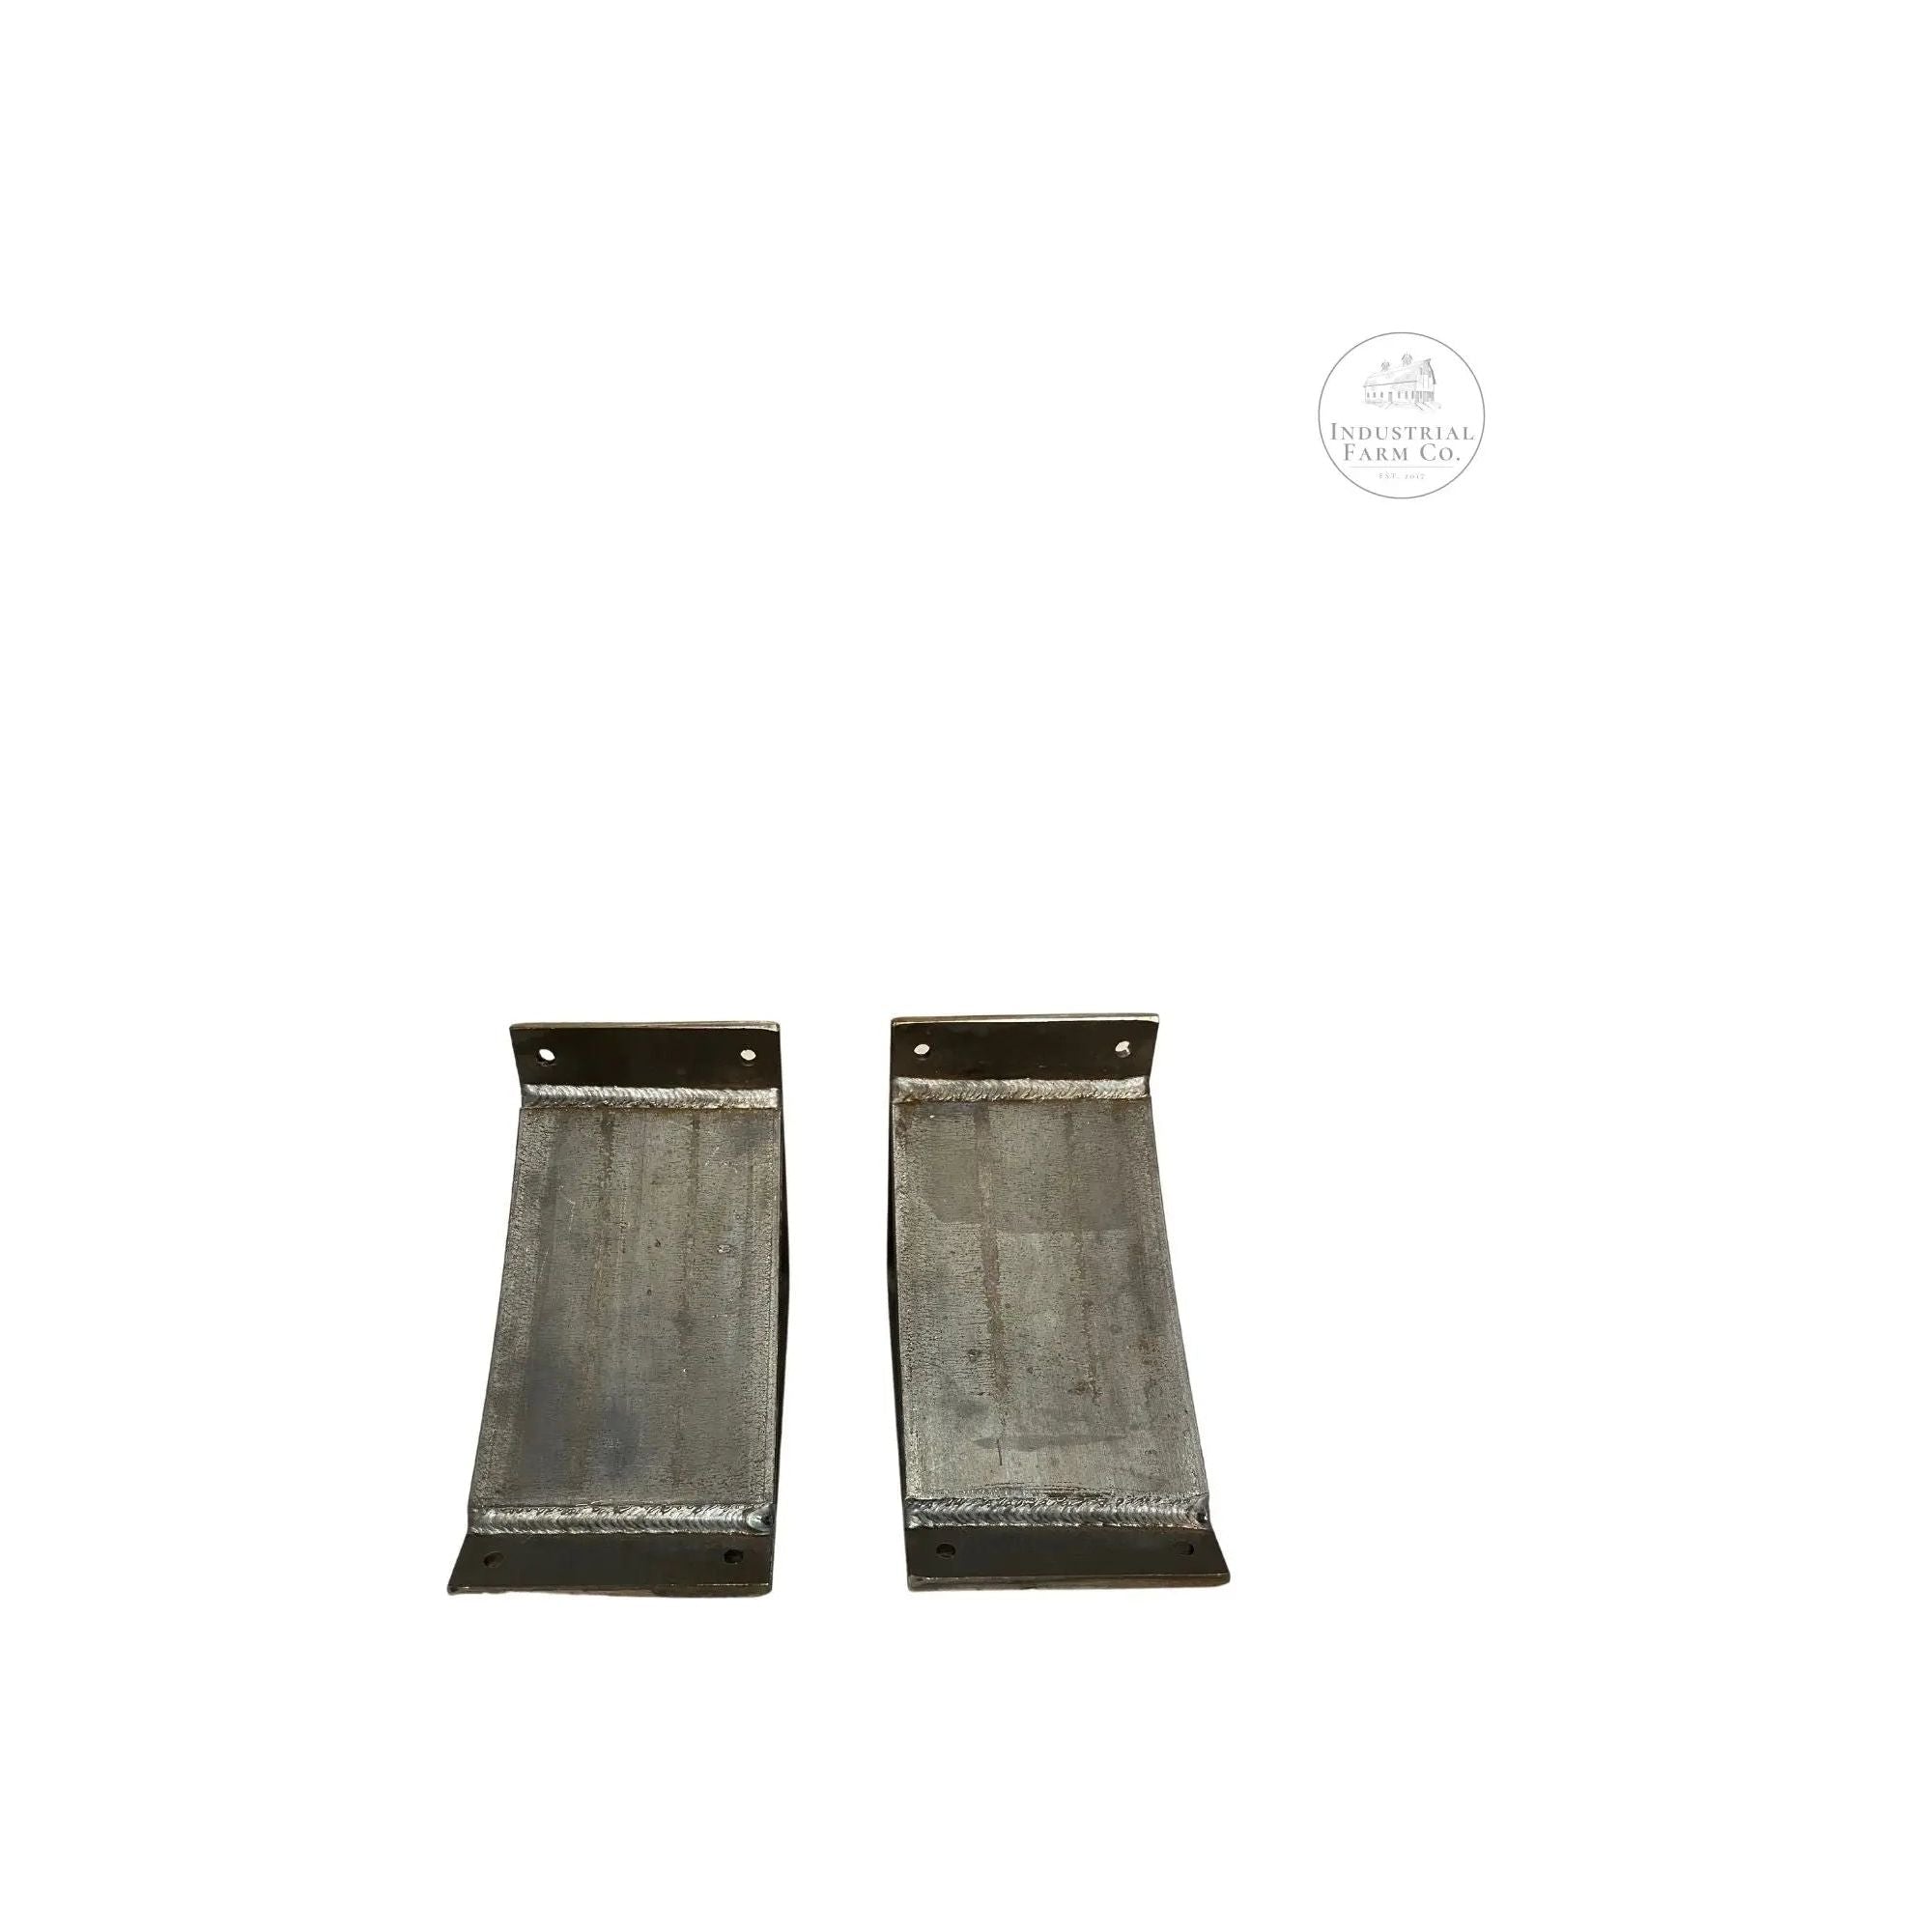 The Lexica Supports 4 3/4 x 7 (Set of 2) | Industrial Farm Co